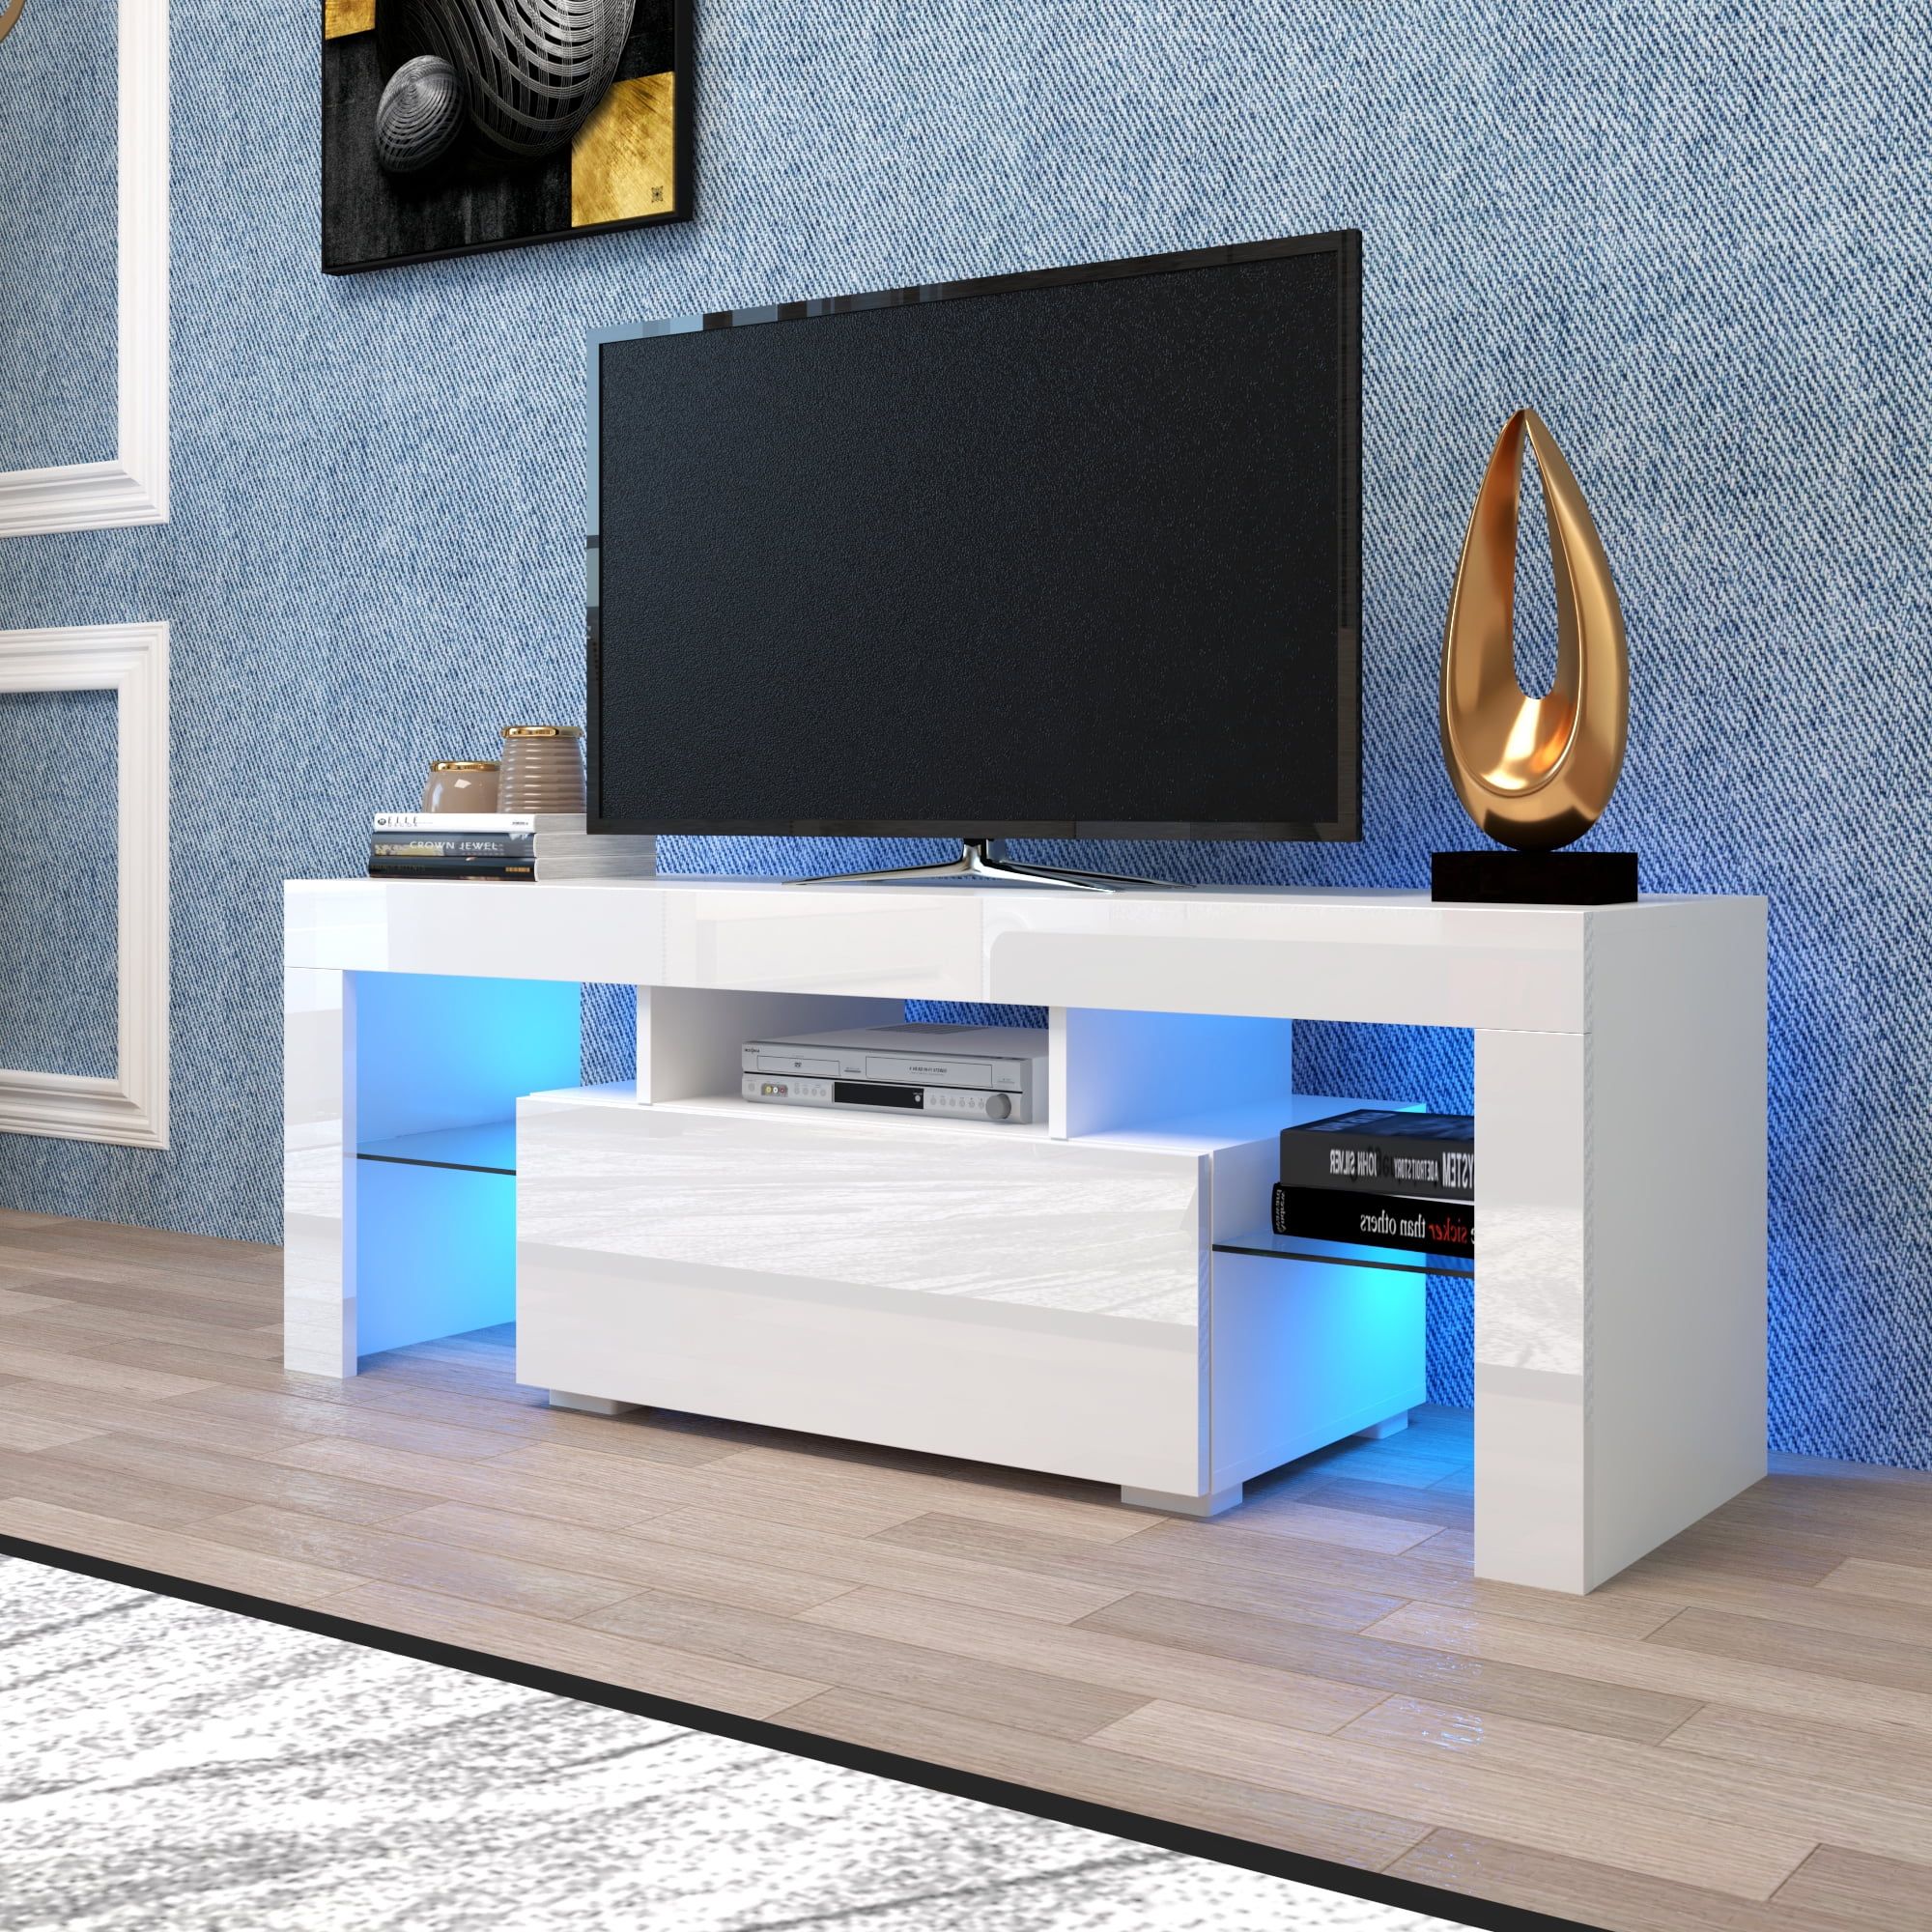 Nestfair White Tv Stand With Led Lights For Tvs Up To 55 Inches For Tv Stands With Led Lights & Power Outlet (Gallery 15 of 20)